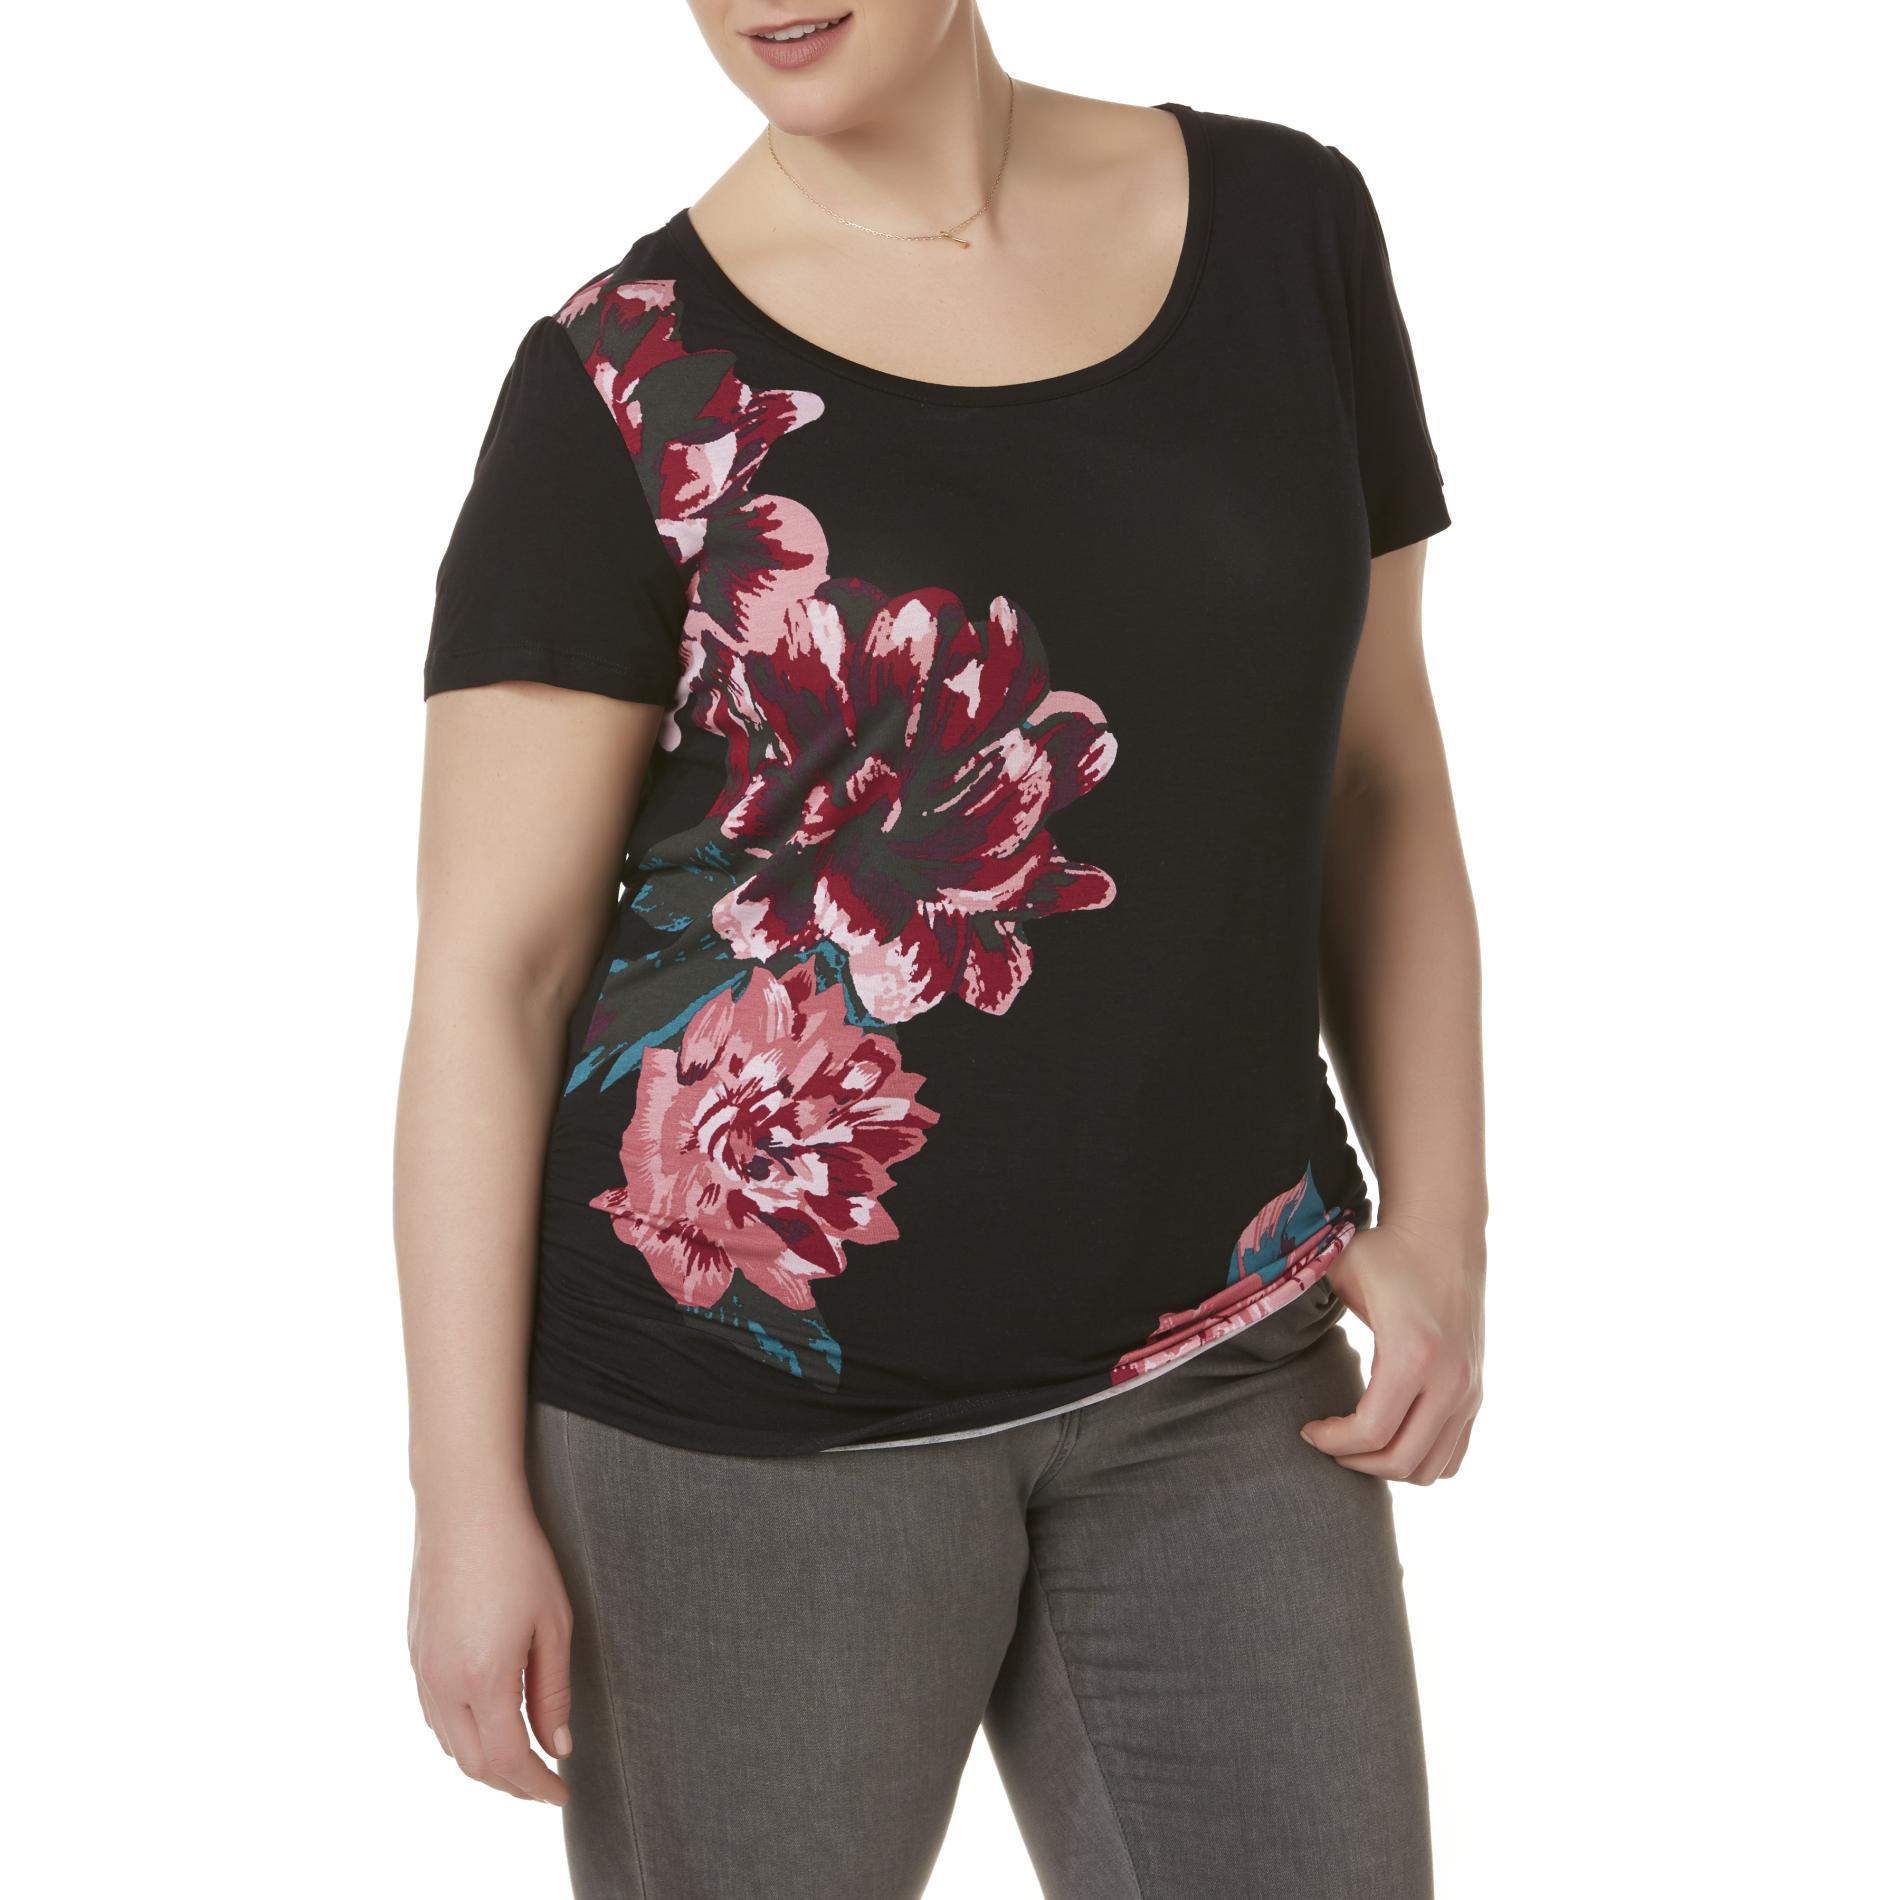 Simply Emma Women's Plus Ruched T-Shirt - Floral